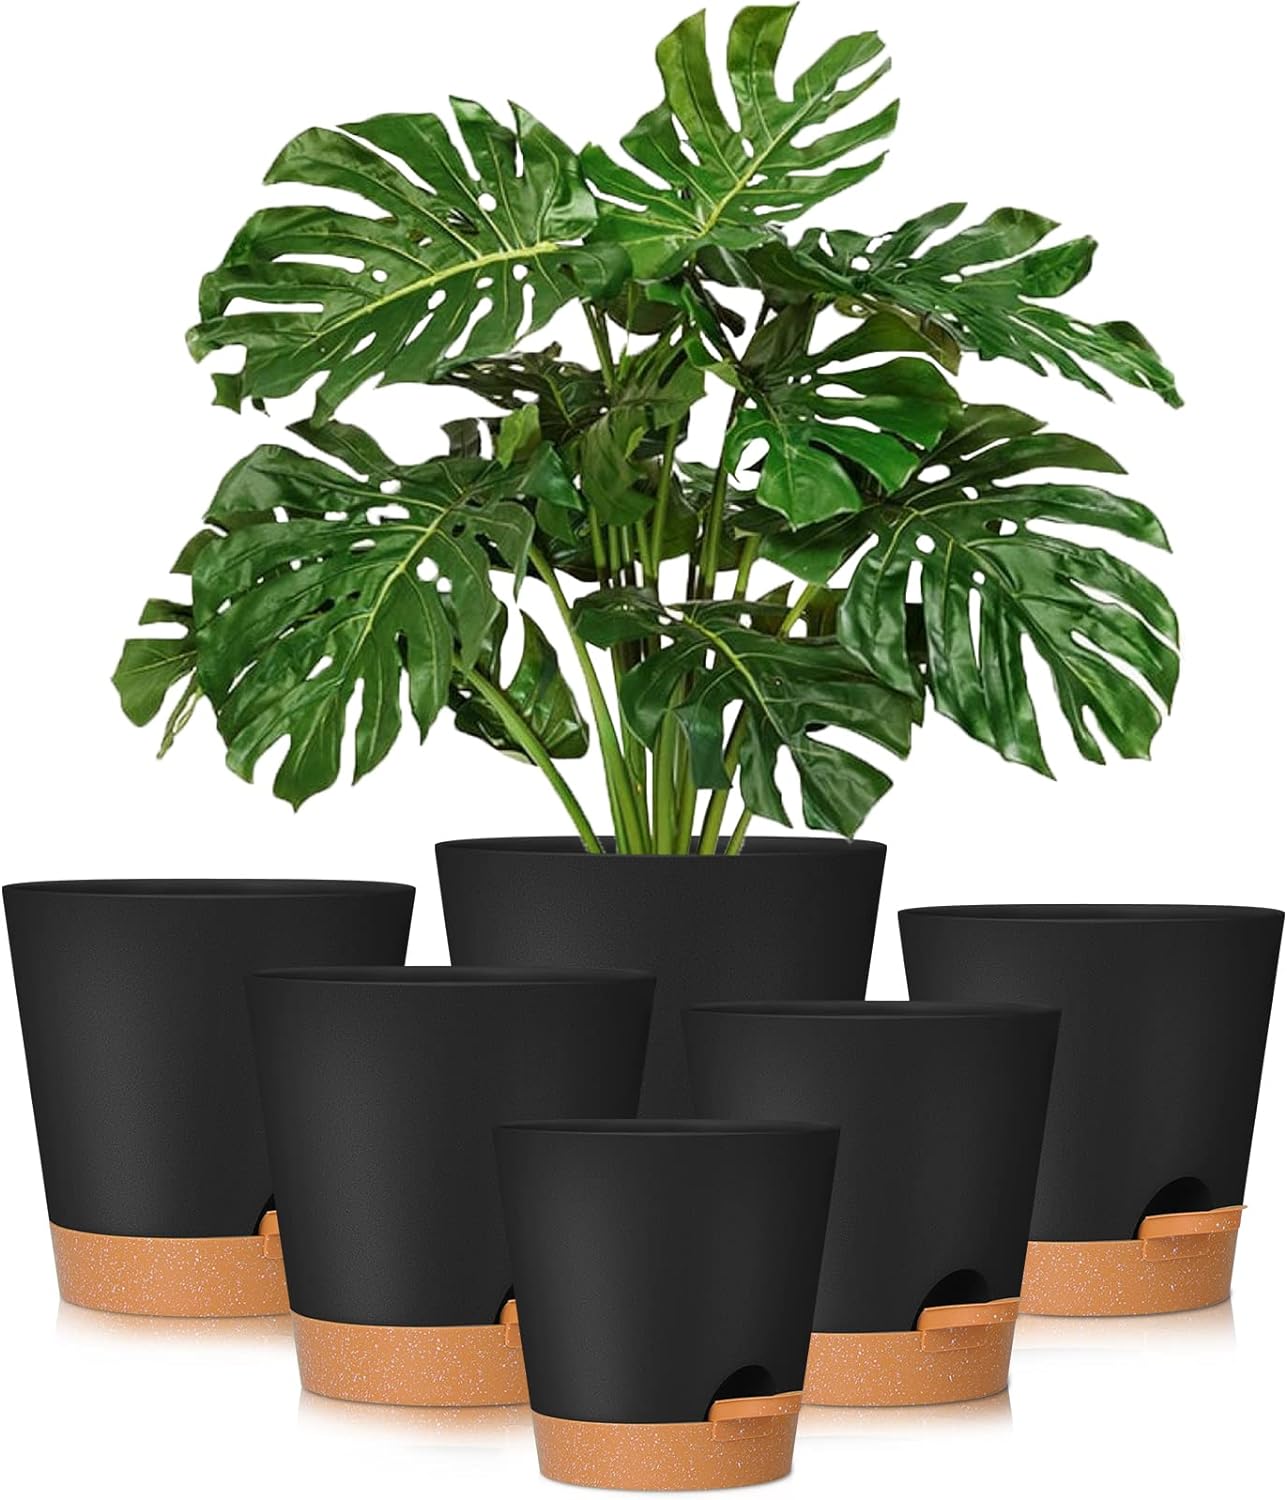 GARDIFE Plant Pots 8/7/6.5/6/5.5/5 Inch Self Watering Planters with Drainage Hole, Plastic Flower Pots, Nursery Planting Pot for All House Plants, African Violet, Flowers, and Cactus,Black